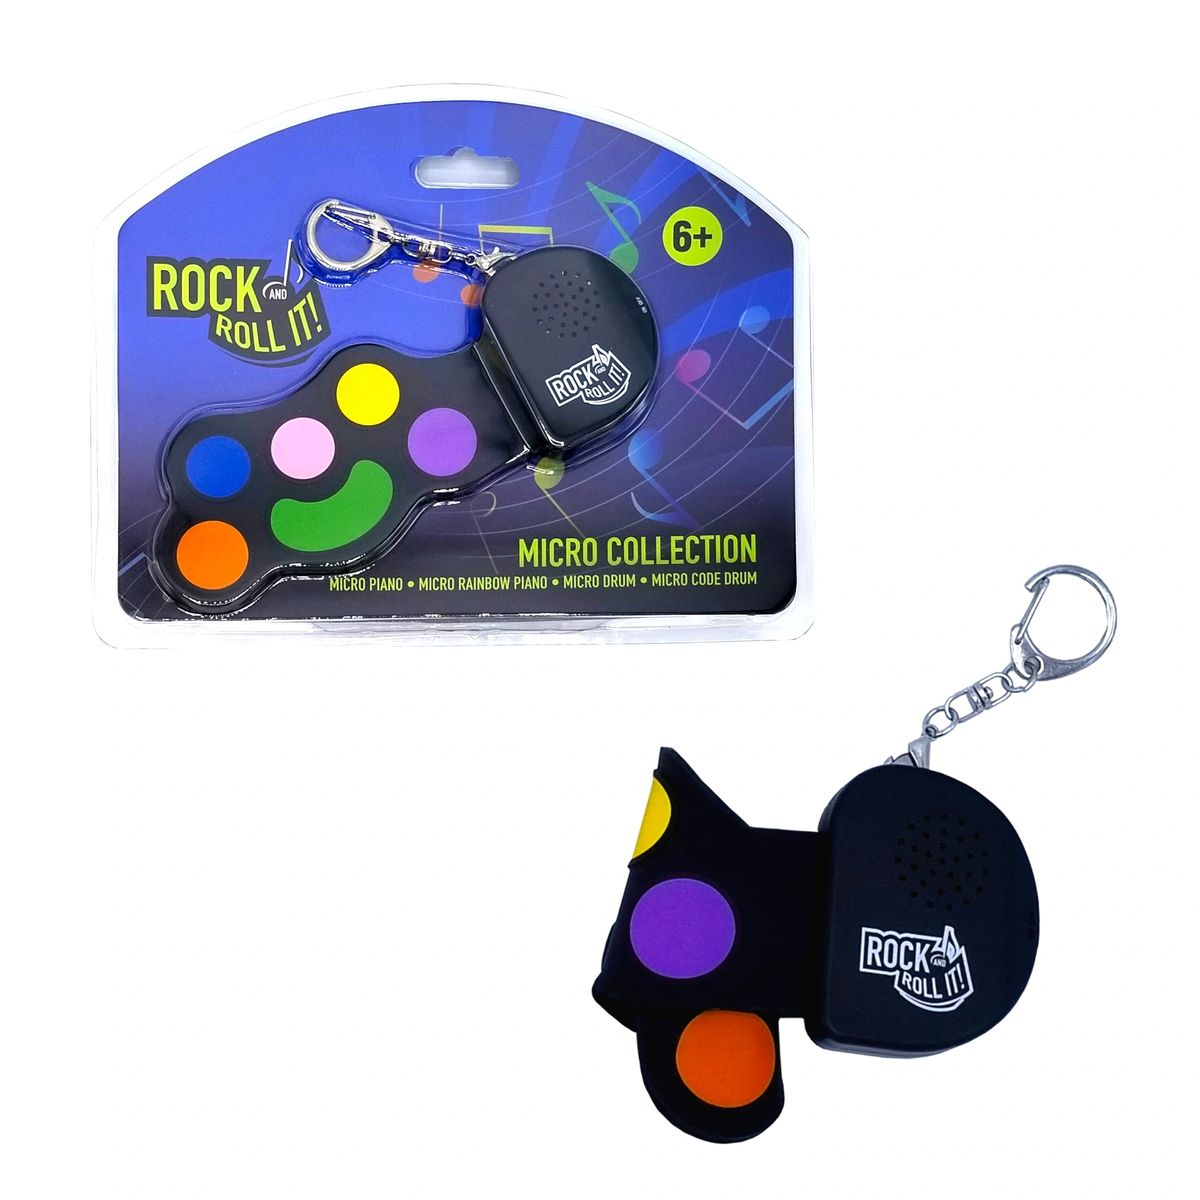 Rock And Roll It - Micro Color Drum